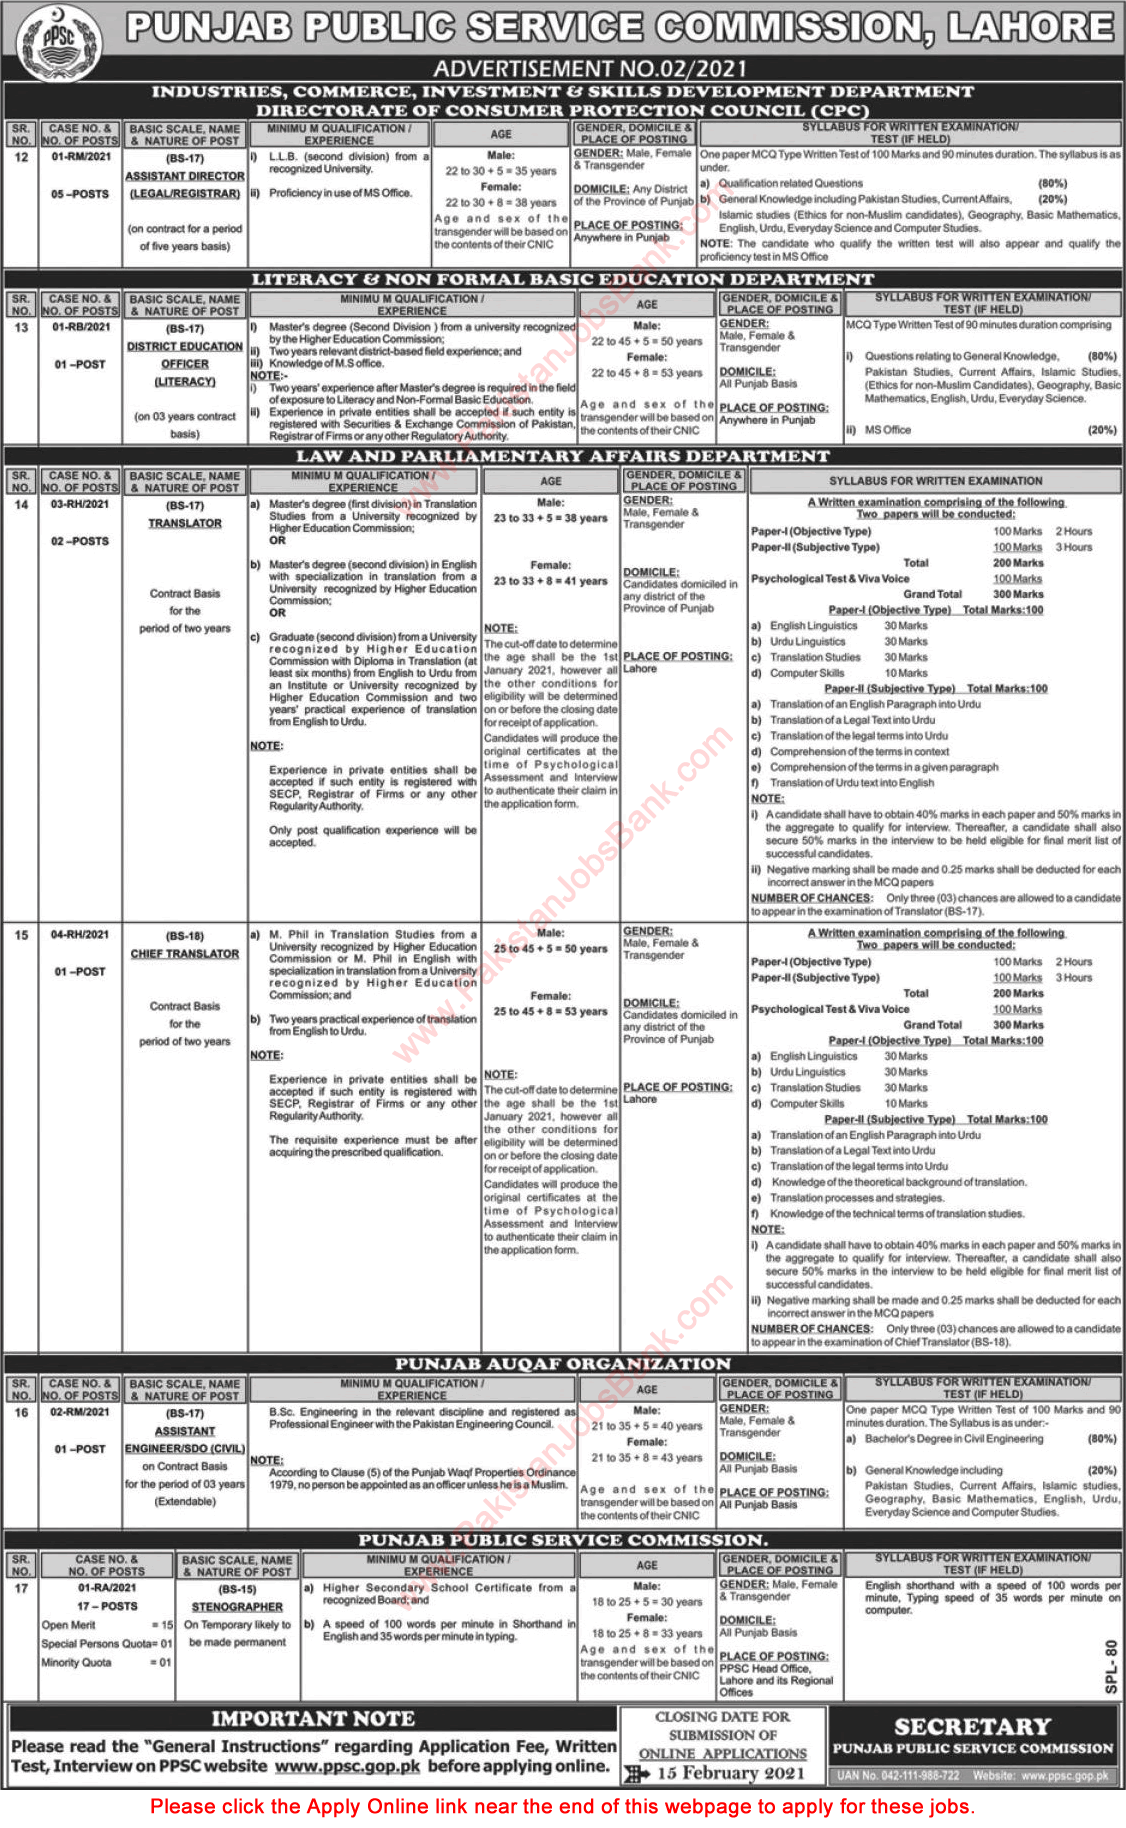 PPSC Jobs 2021 January / February Apply Online Consolidated Advertisement No 02/2021 Latest